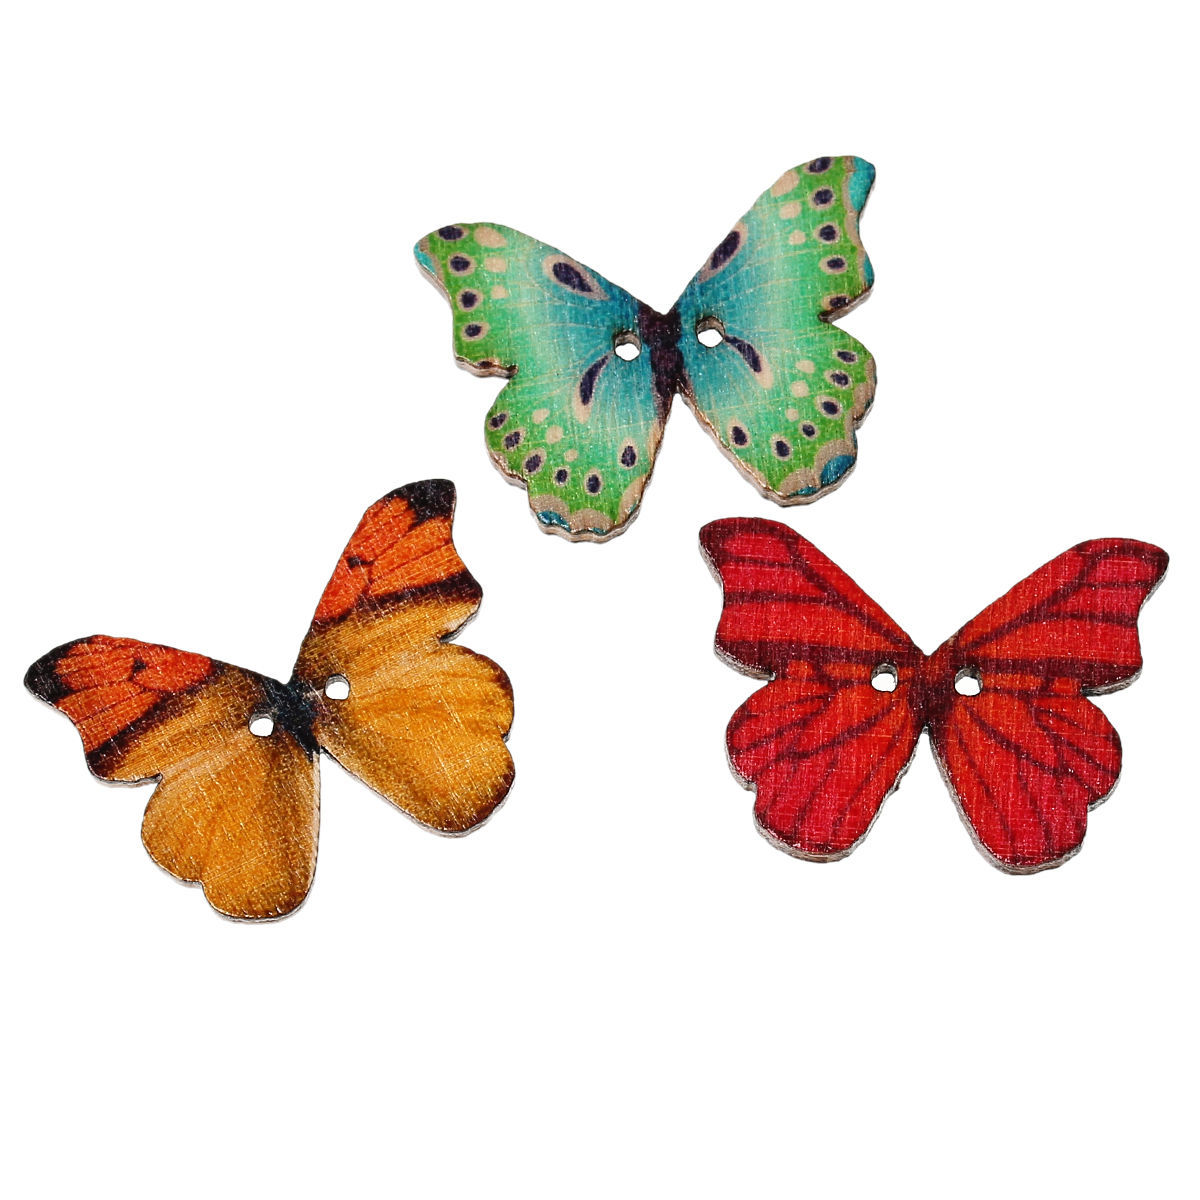 Picture of Wood Sewing Buttons Scrapbooking 2 Holes Butterfly At Random 28mm(1 1/8") x 21mm( 7/8"), 50 PCs